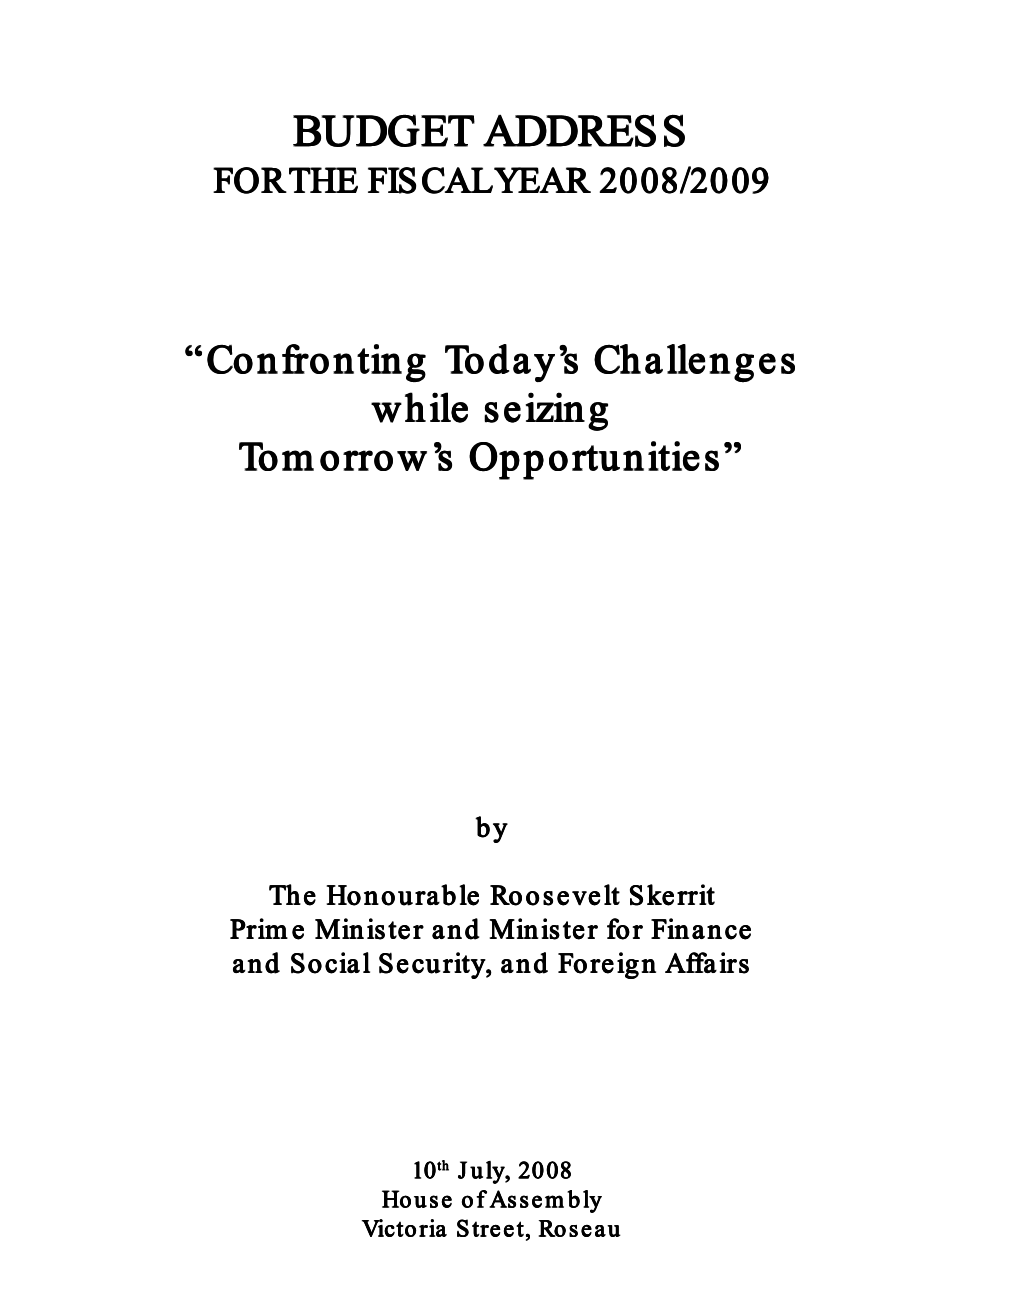 Budget Address for the Fiscal Year 2008/2009